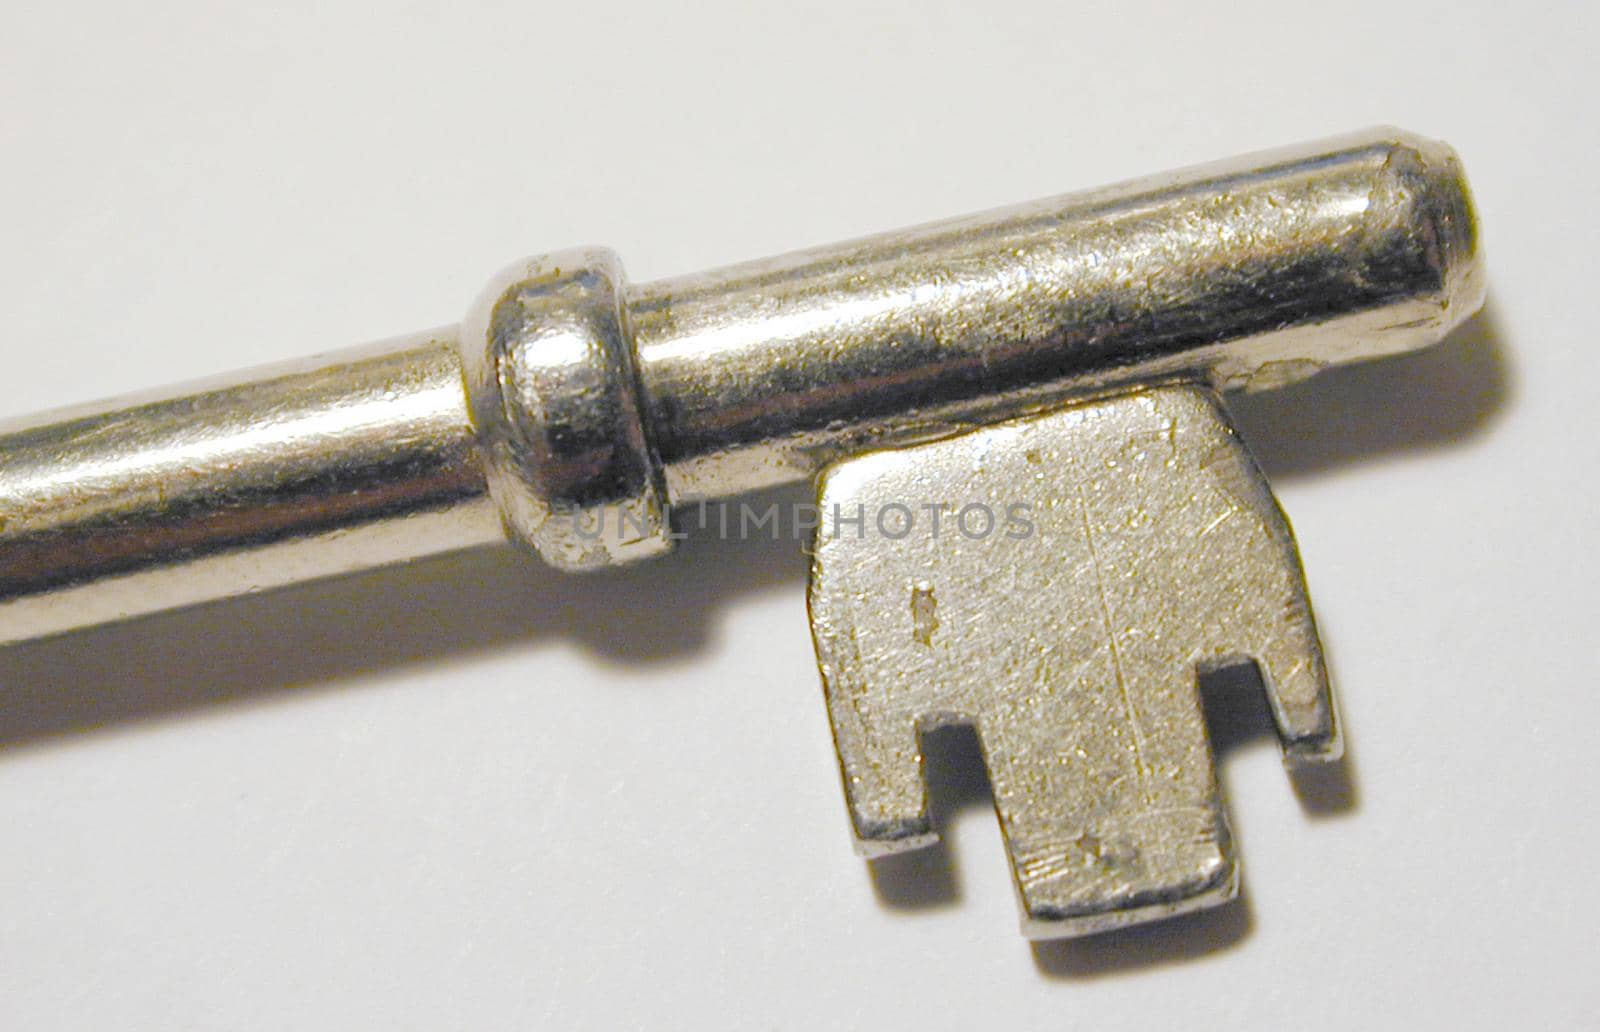 Metallic lever lock key with collar and symmetrical wards, close-up with shadow and copy space on gray